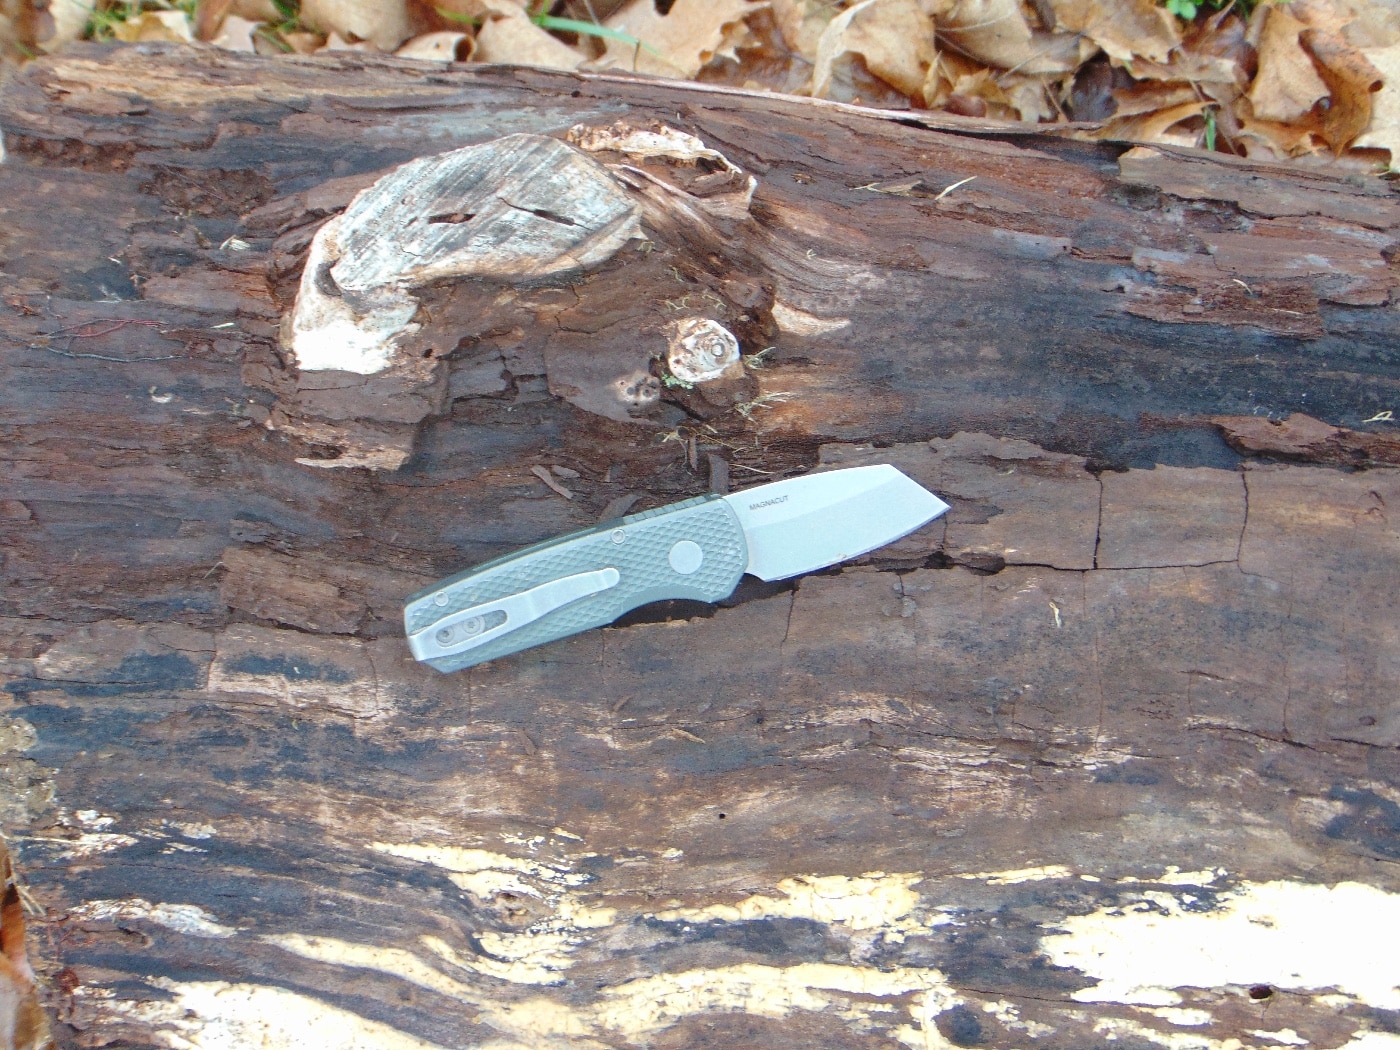 In this photo, the author shows the overall length of the knife with an open blade. The sharp knife lies on a pine log in the forrest. The knife's texture is plainly visible making for an interesting take on their classic Runt knife design. The author found the knife was an excellent performer in testing. If customer reviews are to be believed, a lot of people like it. Similar to the classic Runt model, the sub-two-inch blade is the perfect size at 1.96-inch.